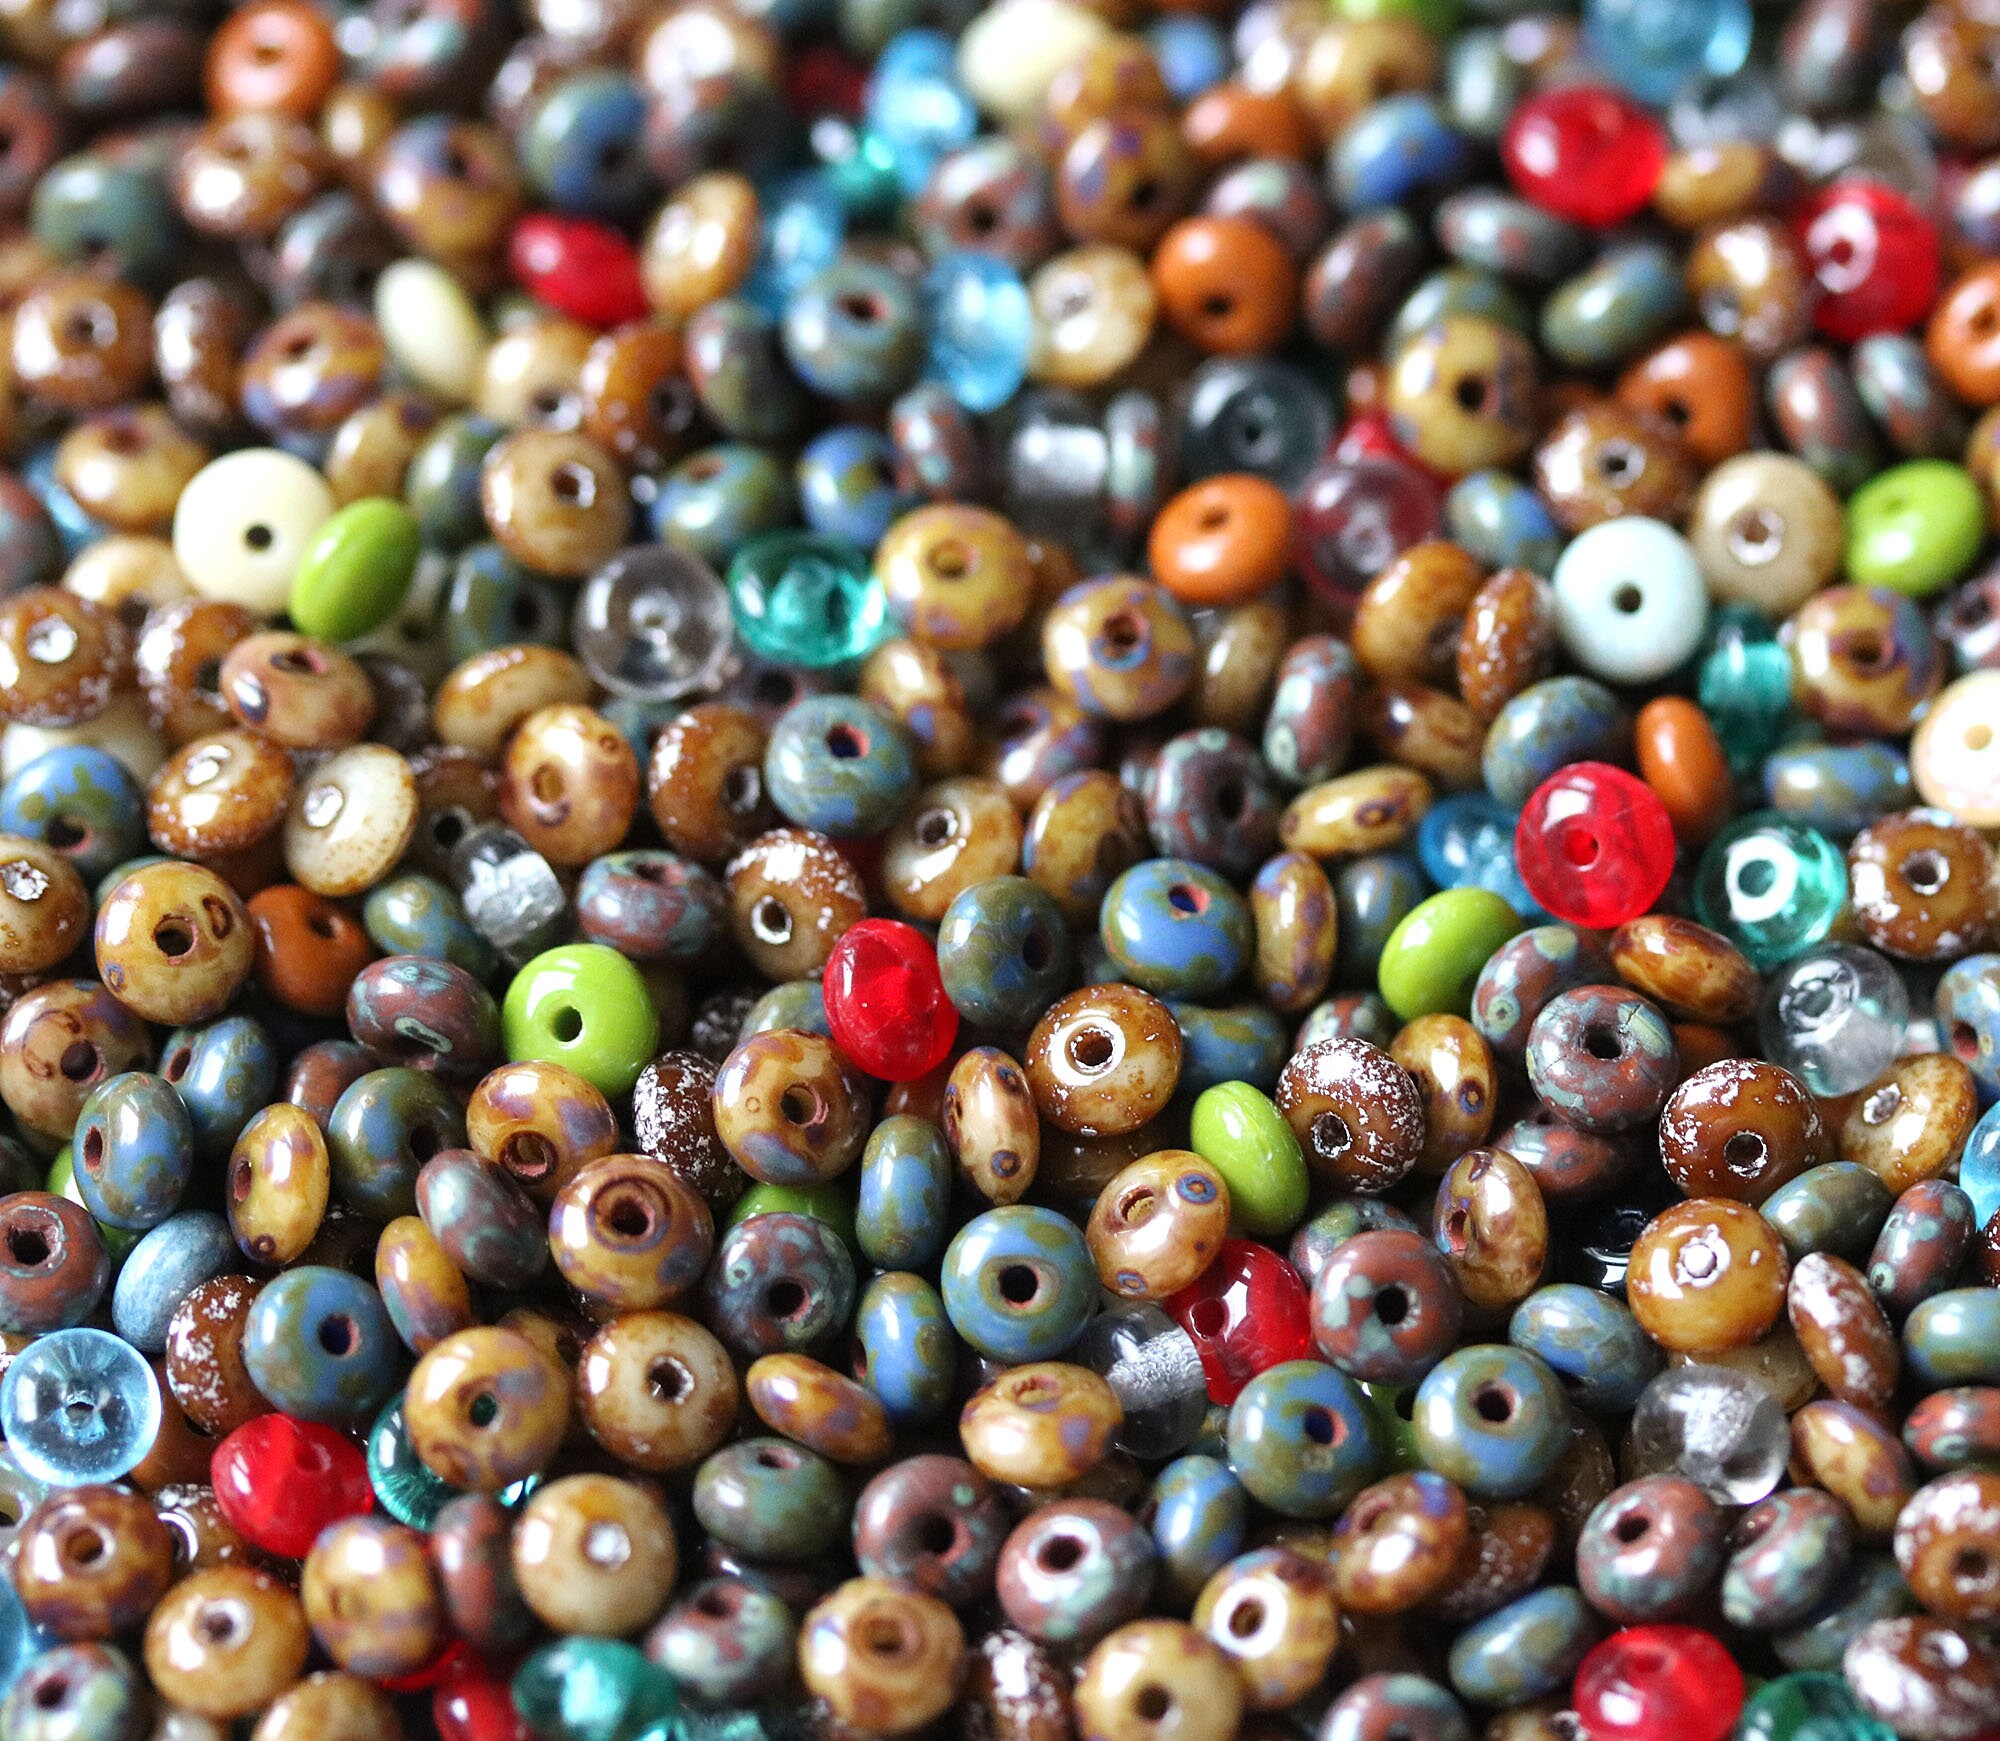 10g Mixed Colors Glass Seed Beads Czech Seed Beads 2mm Small 